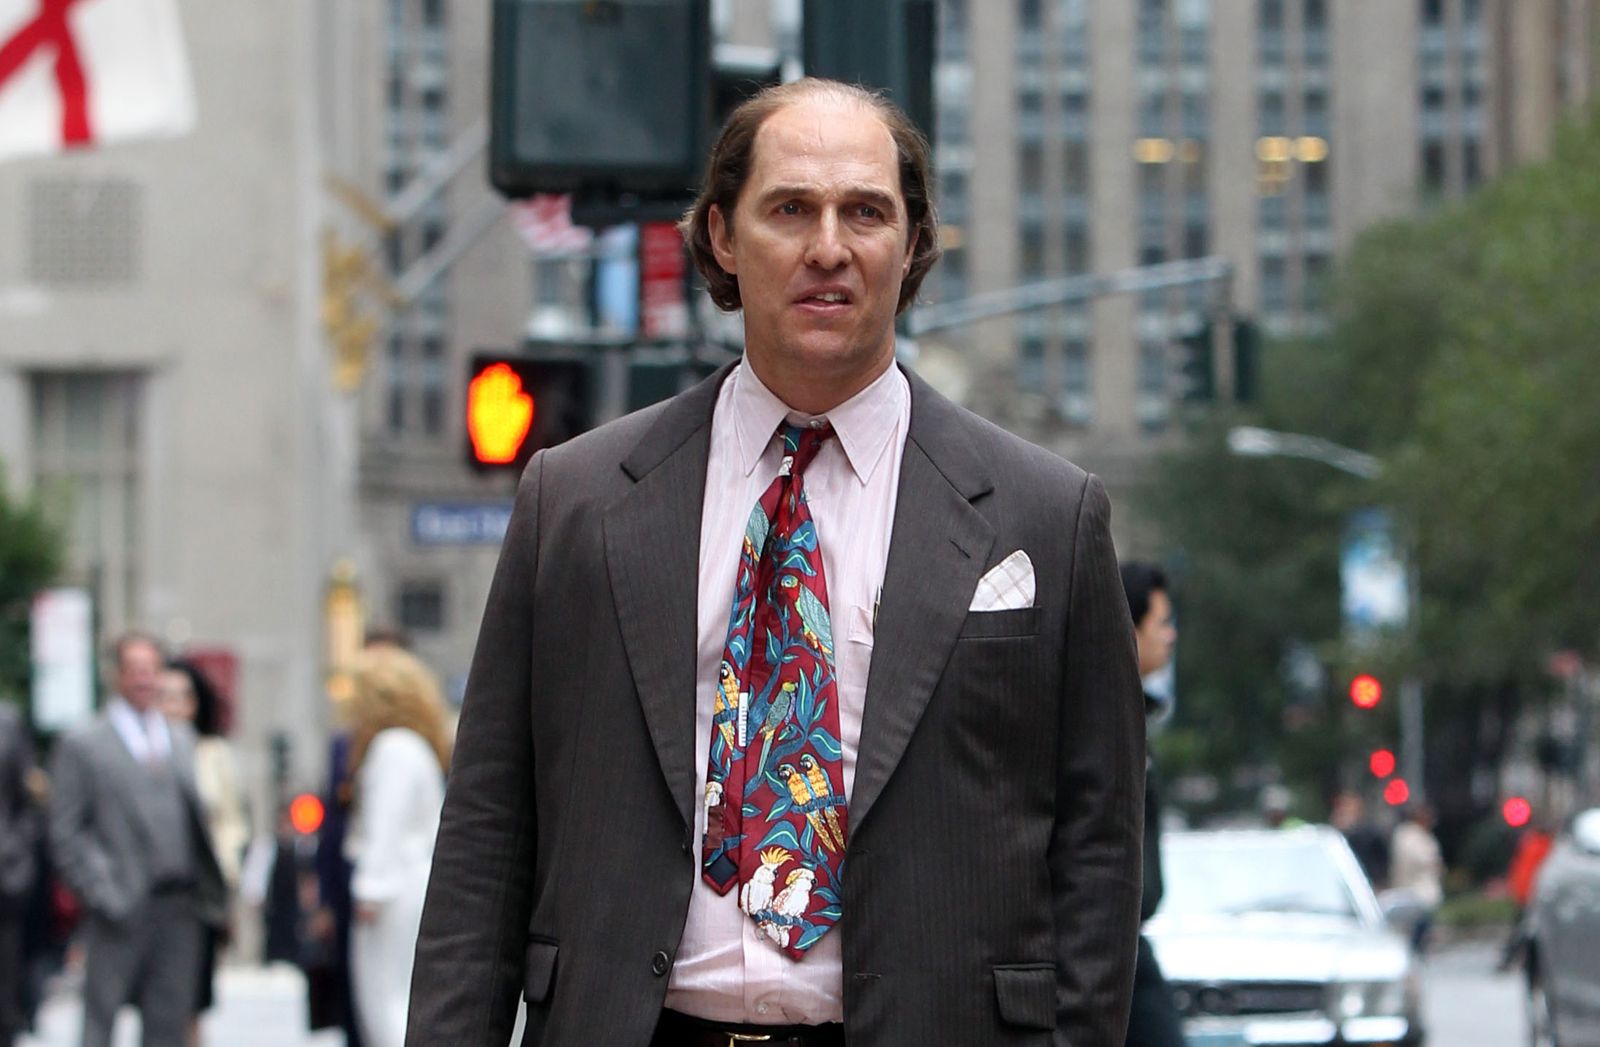 Nutritionist: Matthew McConaughey’s Weight Gain For ‘Gold’ Posed A Big Health Risk